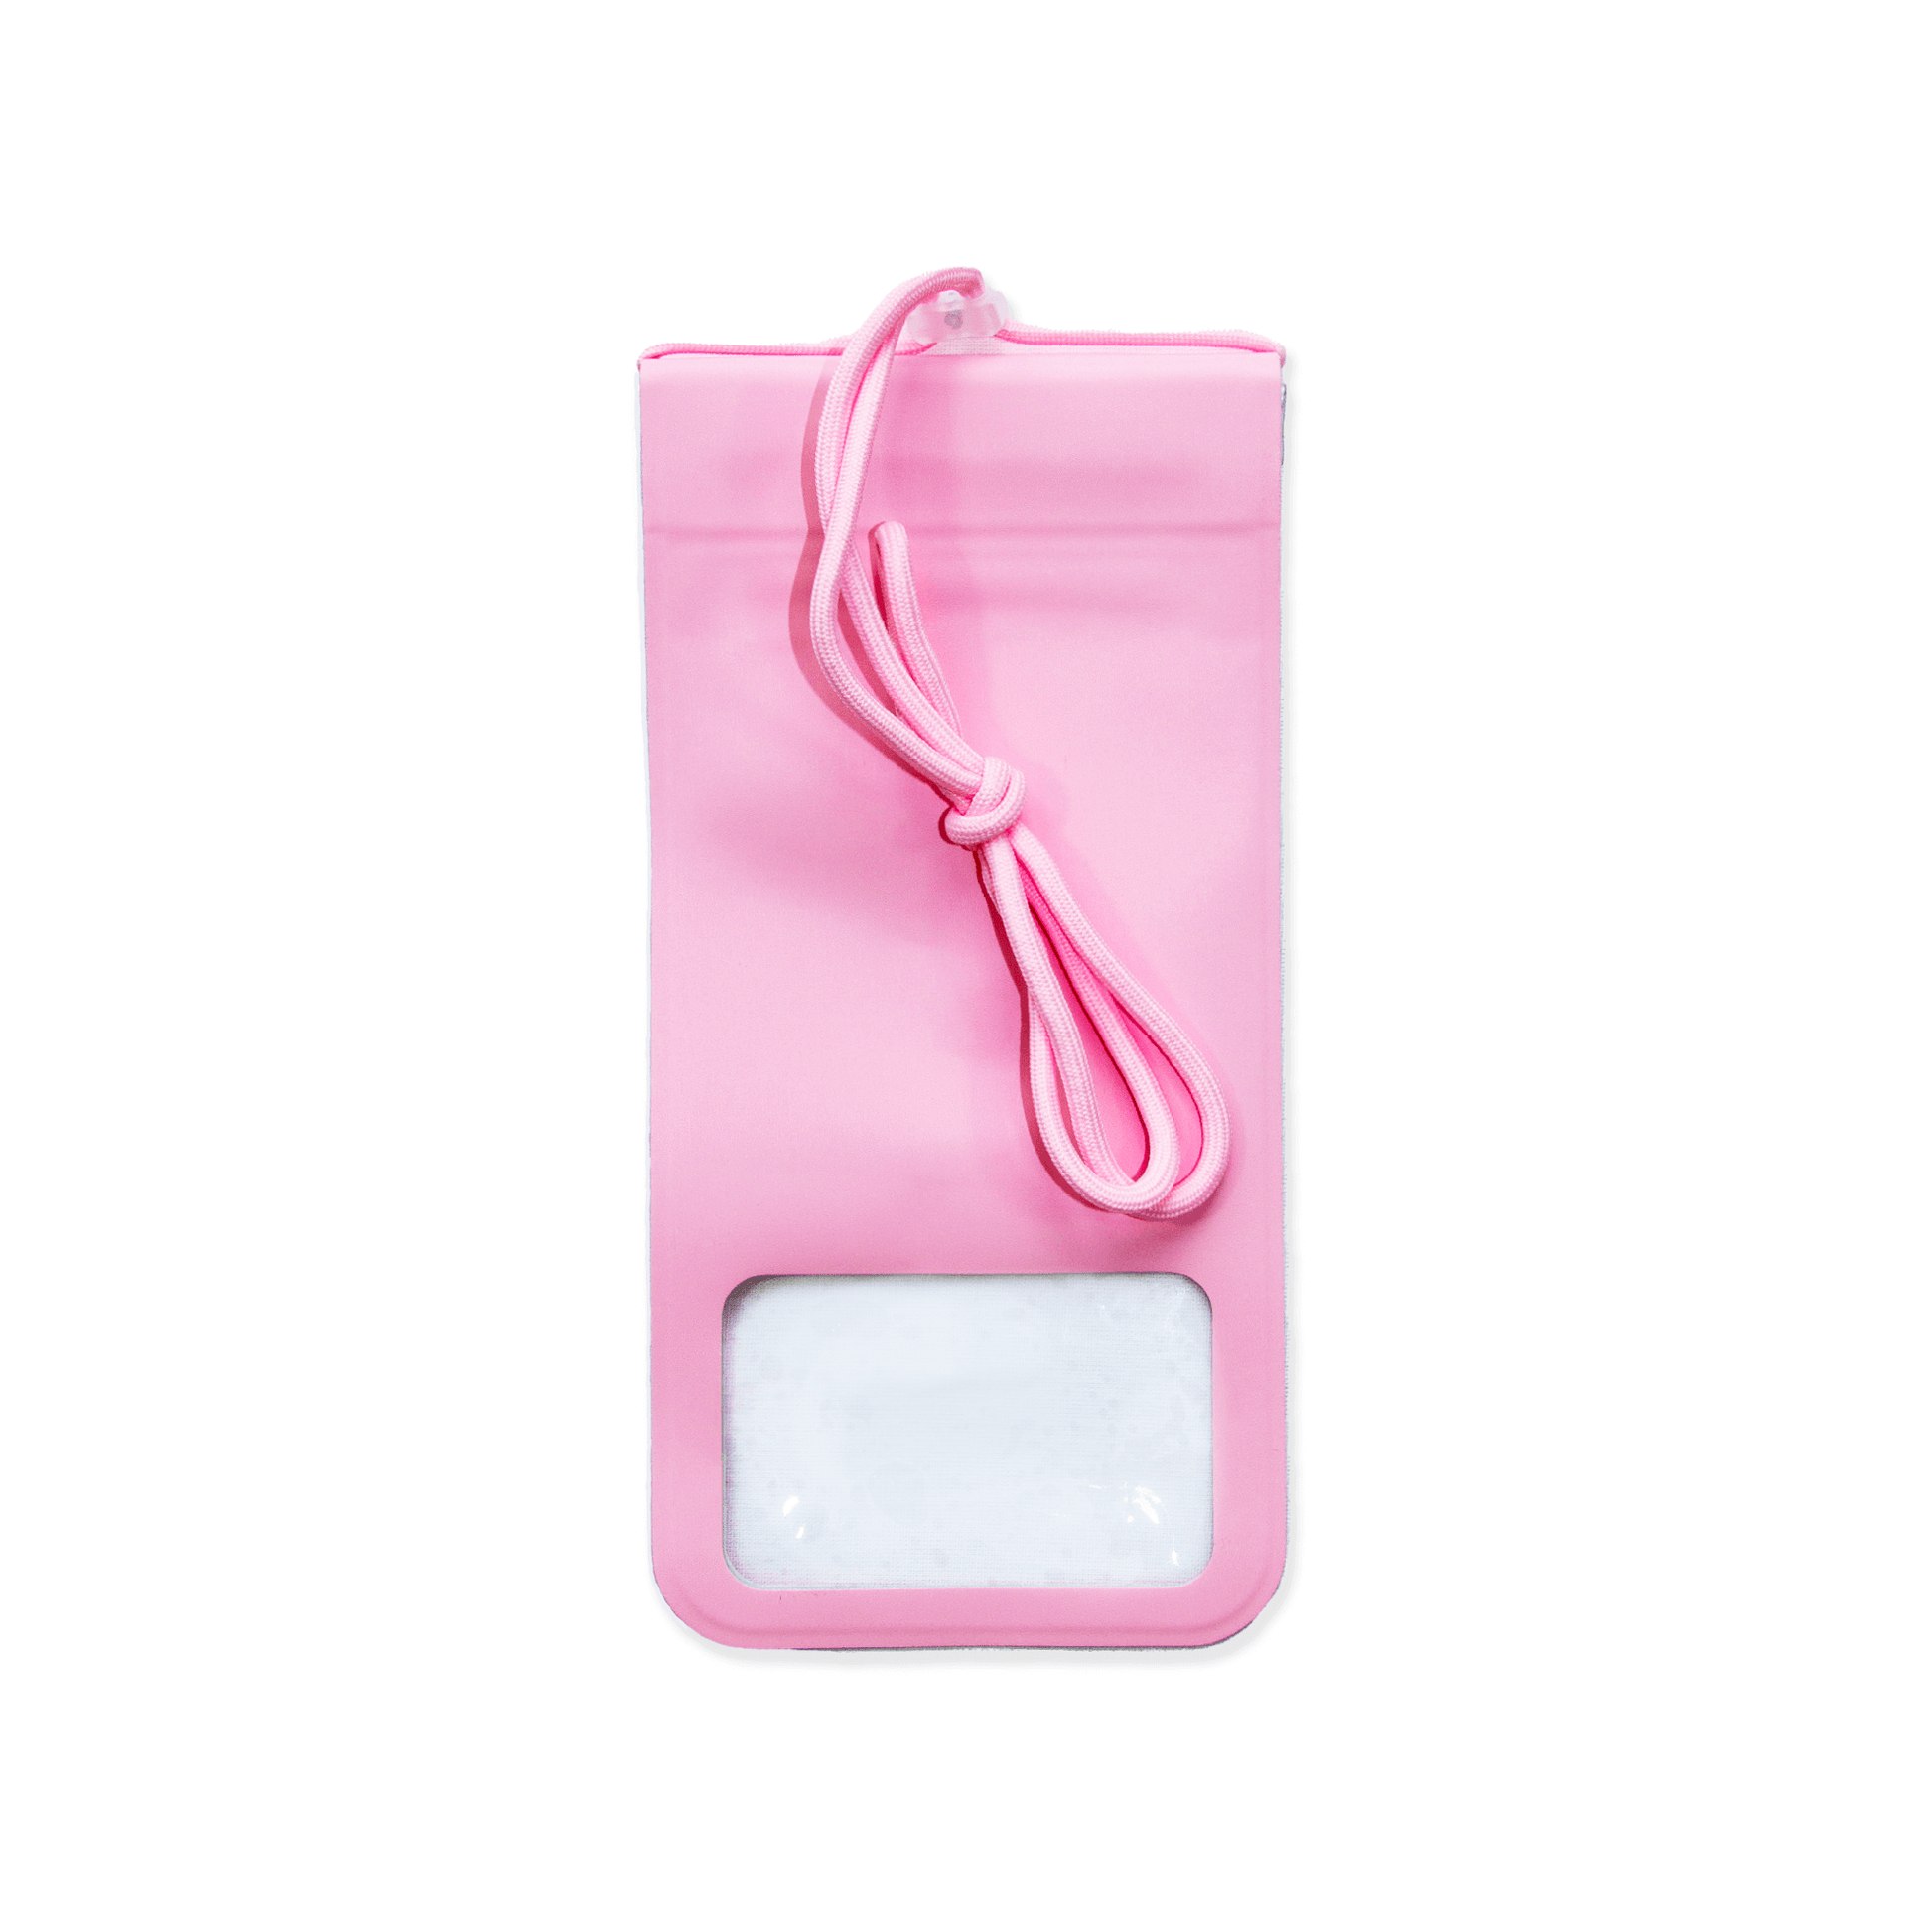 Waterproof phone case for iphone 12 pro. Waterproof phone pouch in light pink with neck strap.